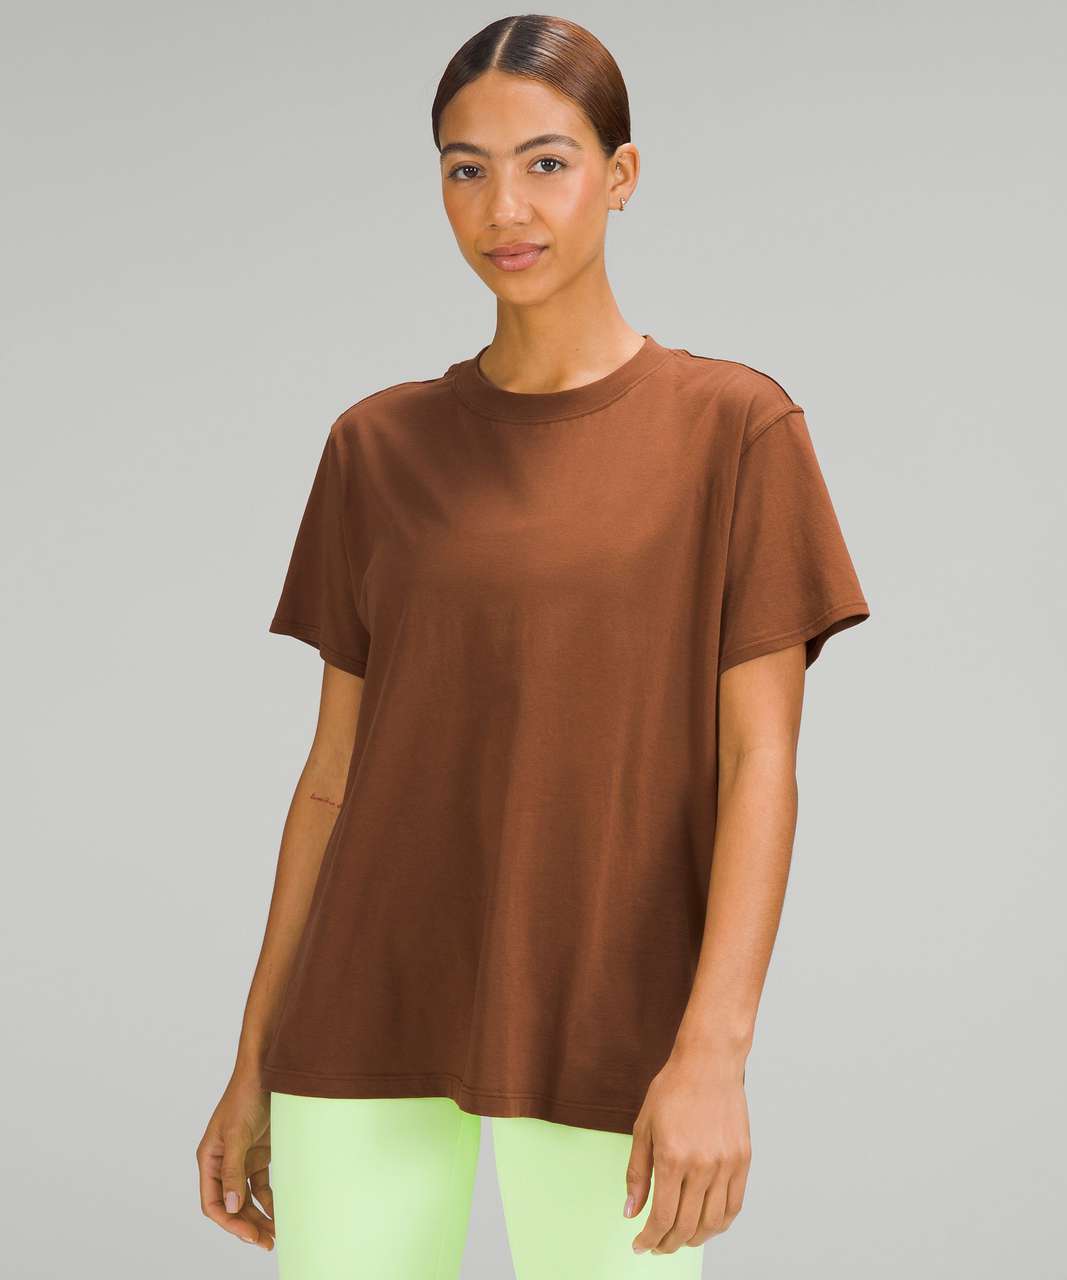 Lululemon All Yours Cotton T-Shirt - Roasted Brown